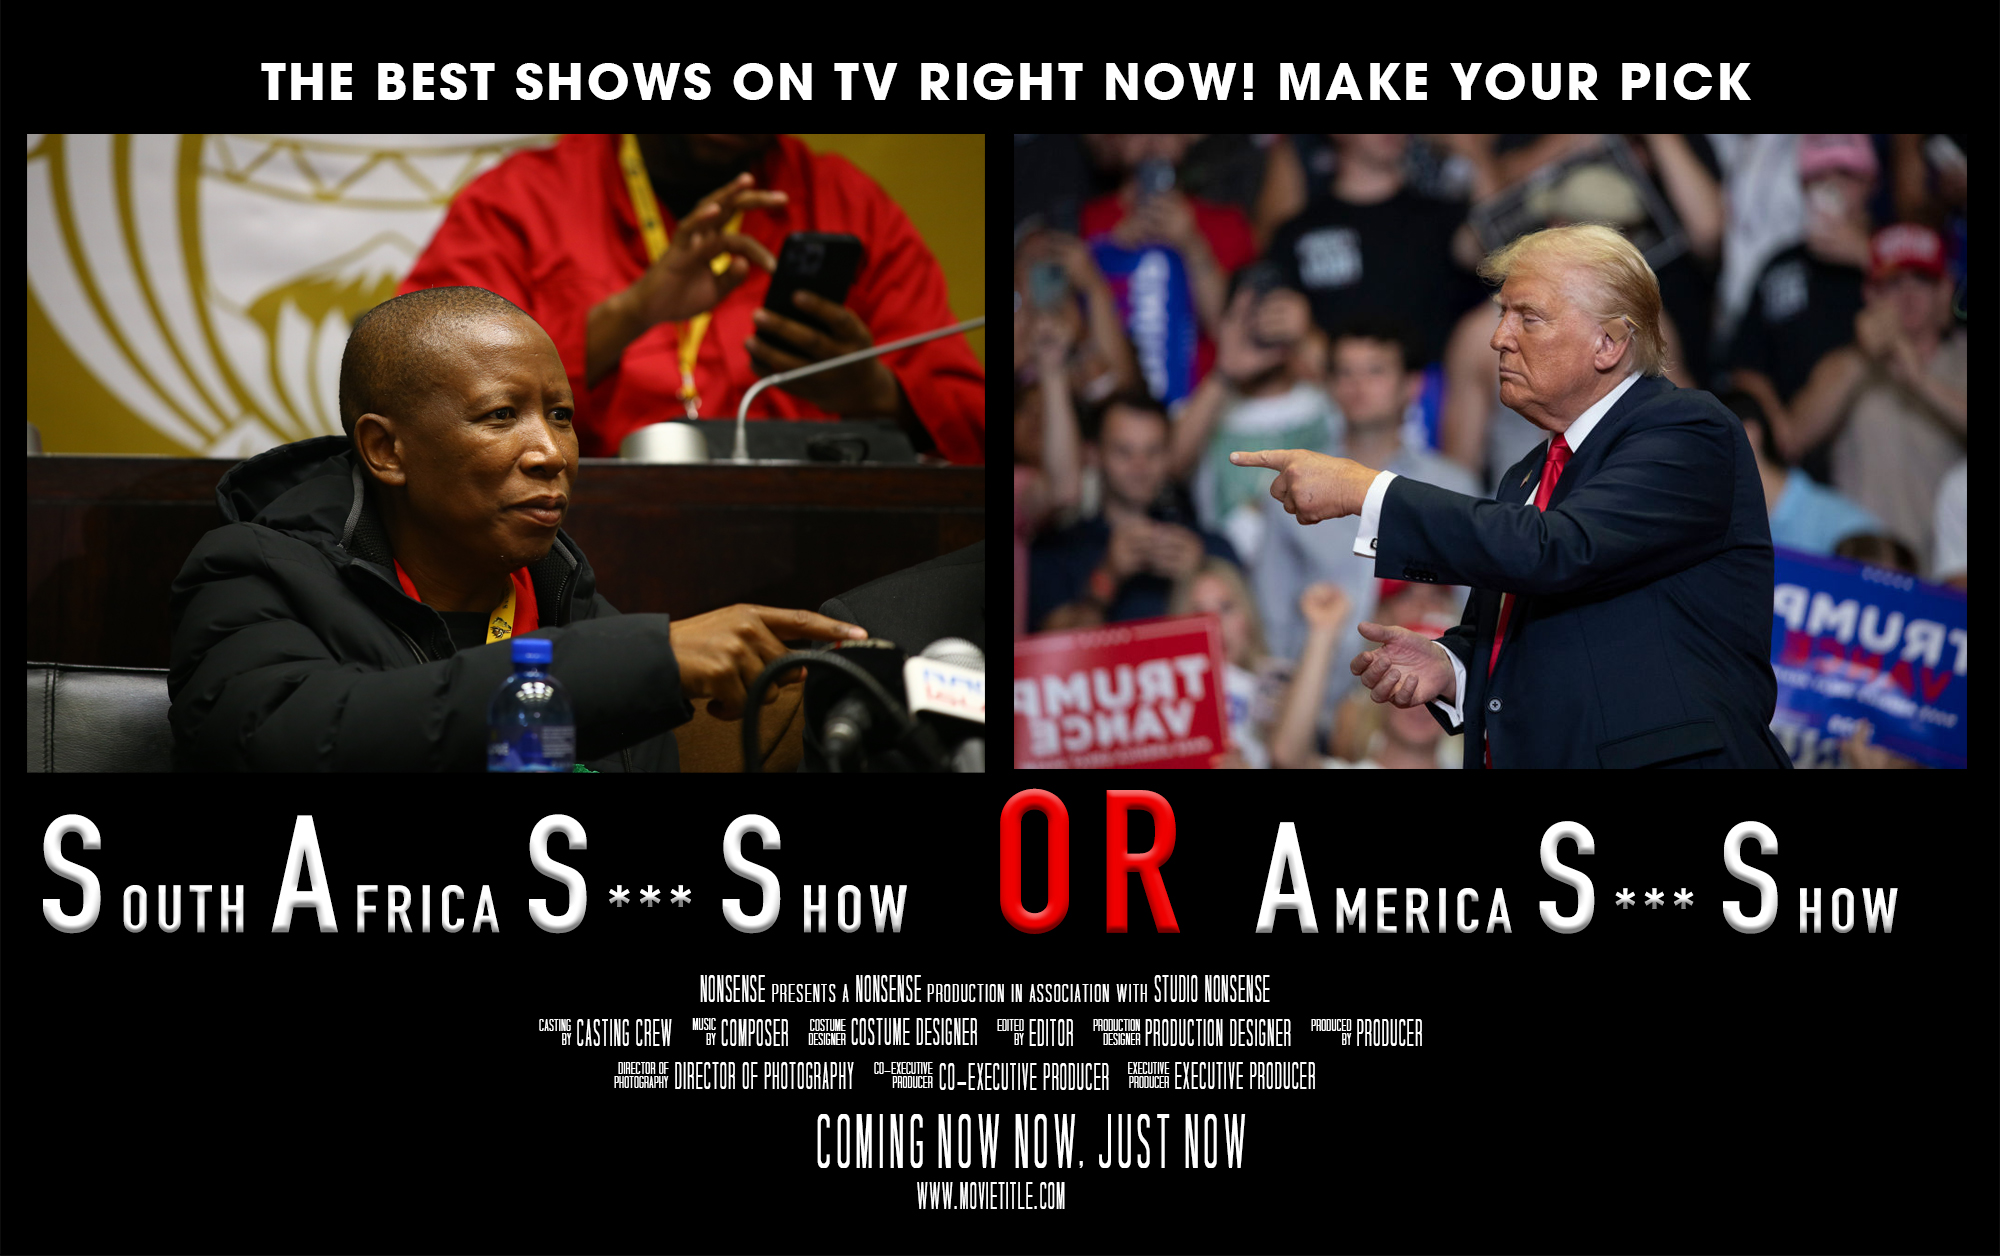 The America S*** Show vs the South Africa S*** Show